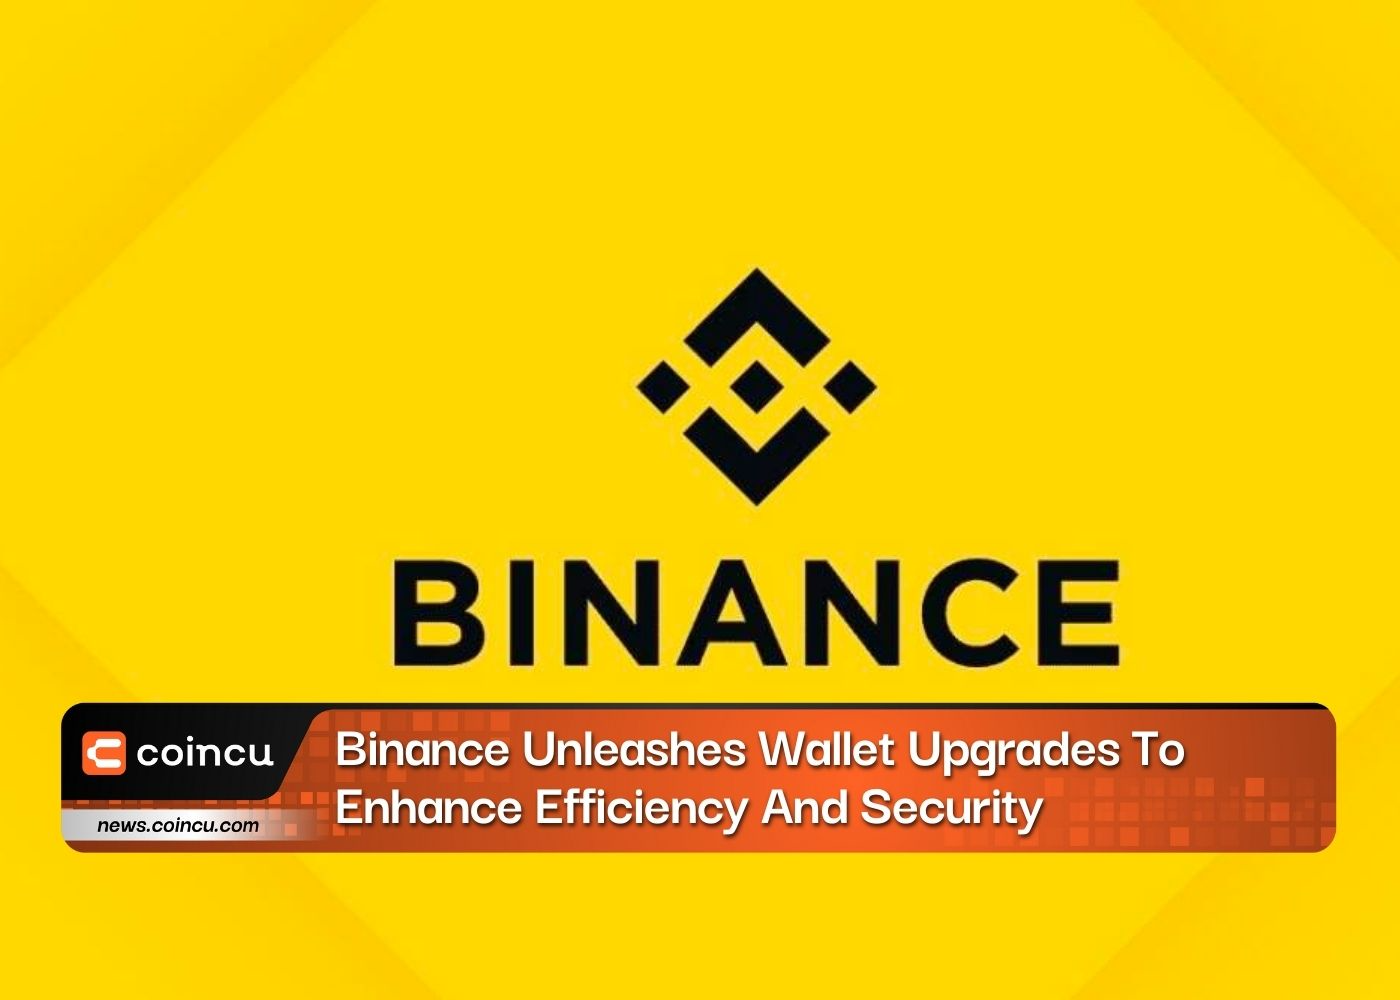 Binance Unleashes Wallet Upgrades To Enhance Efficiency And Security